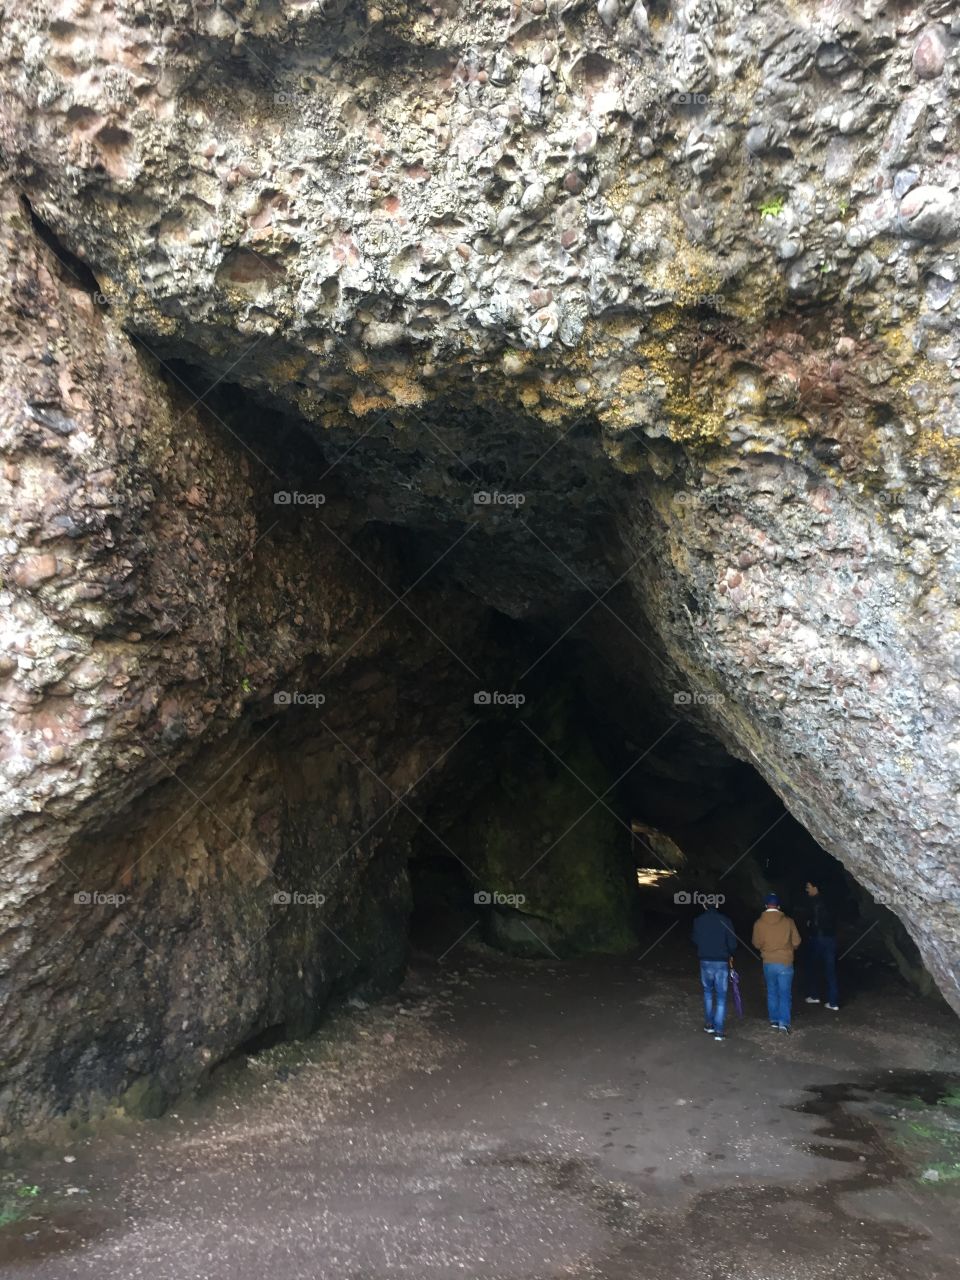 A picture of a cave in Northern Ireland with two people exploring it in the distance 